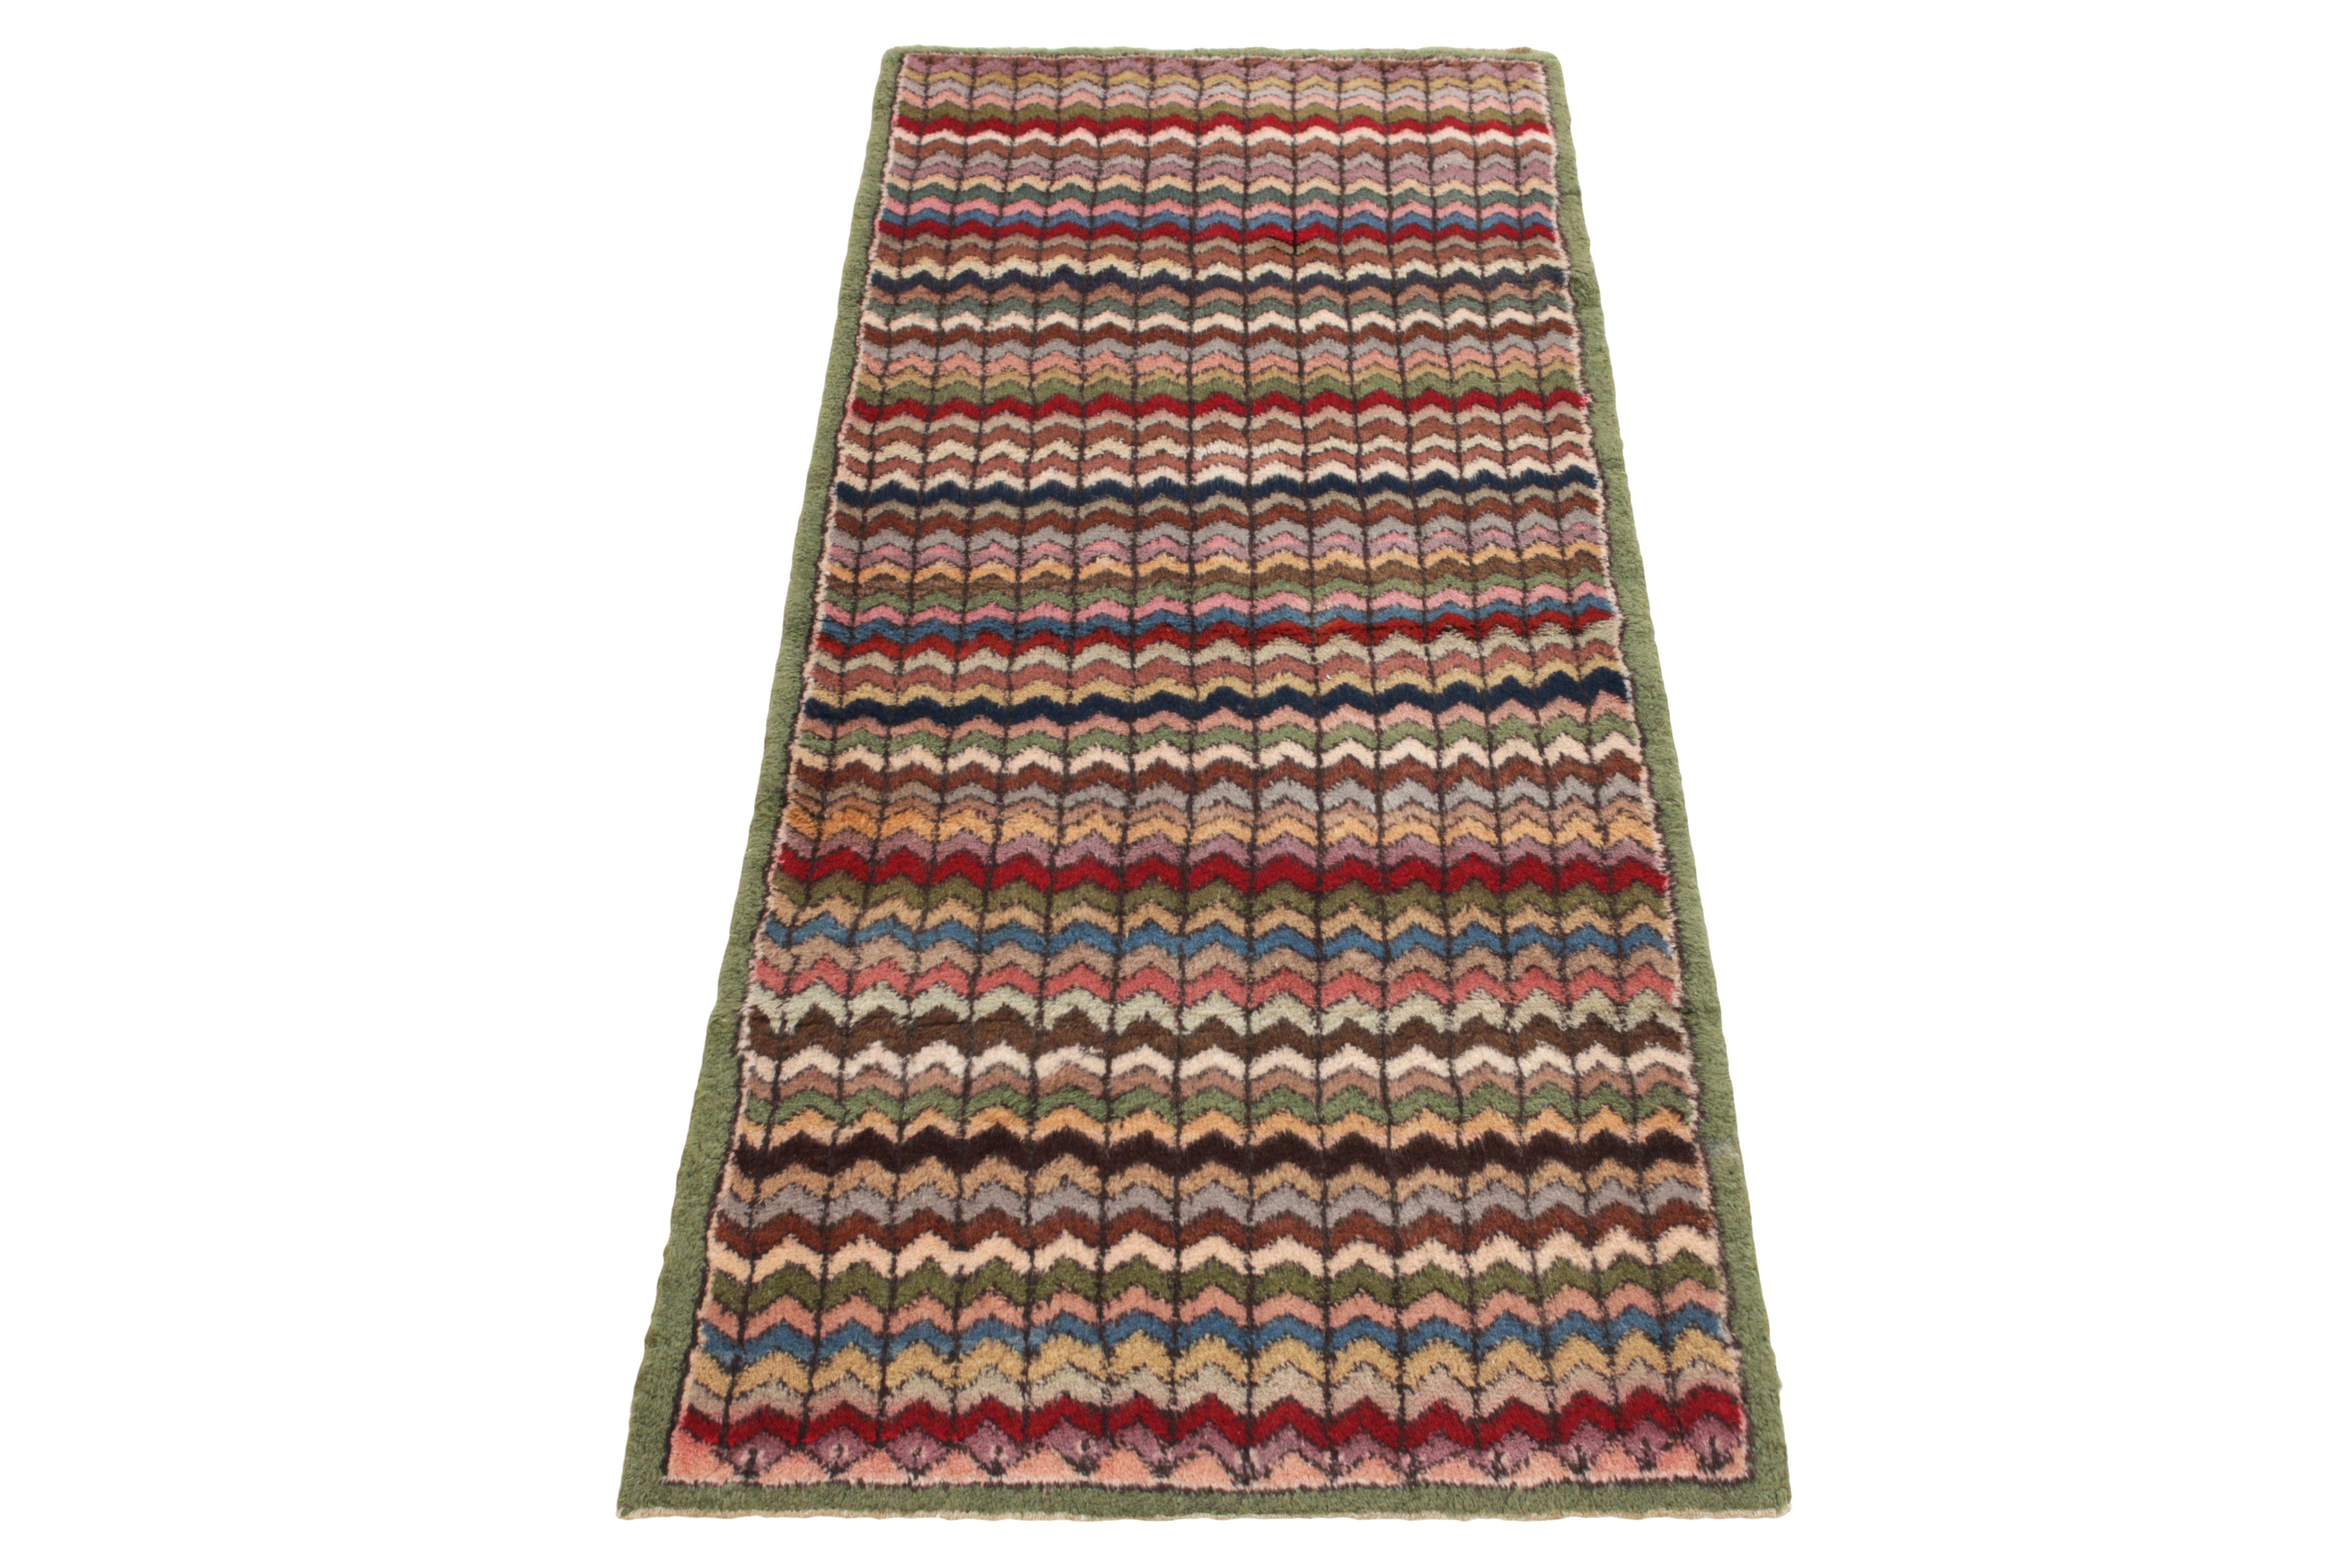 Hand-knotted in wool, a 3x7 vintage runner from a bold Turkish designer commemorated in Rug & Kilim’s Mid-Century Pasha Collection. The 1960s piece witnesses exceptional pagination with repetitive chevron patterns in red, blue, yellow, pink, beige &